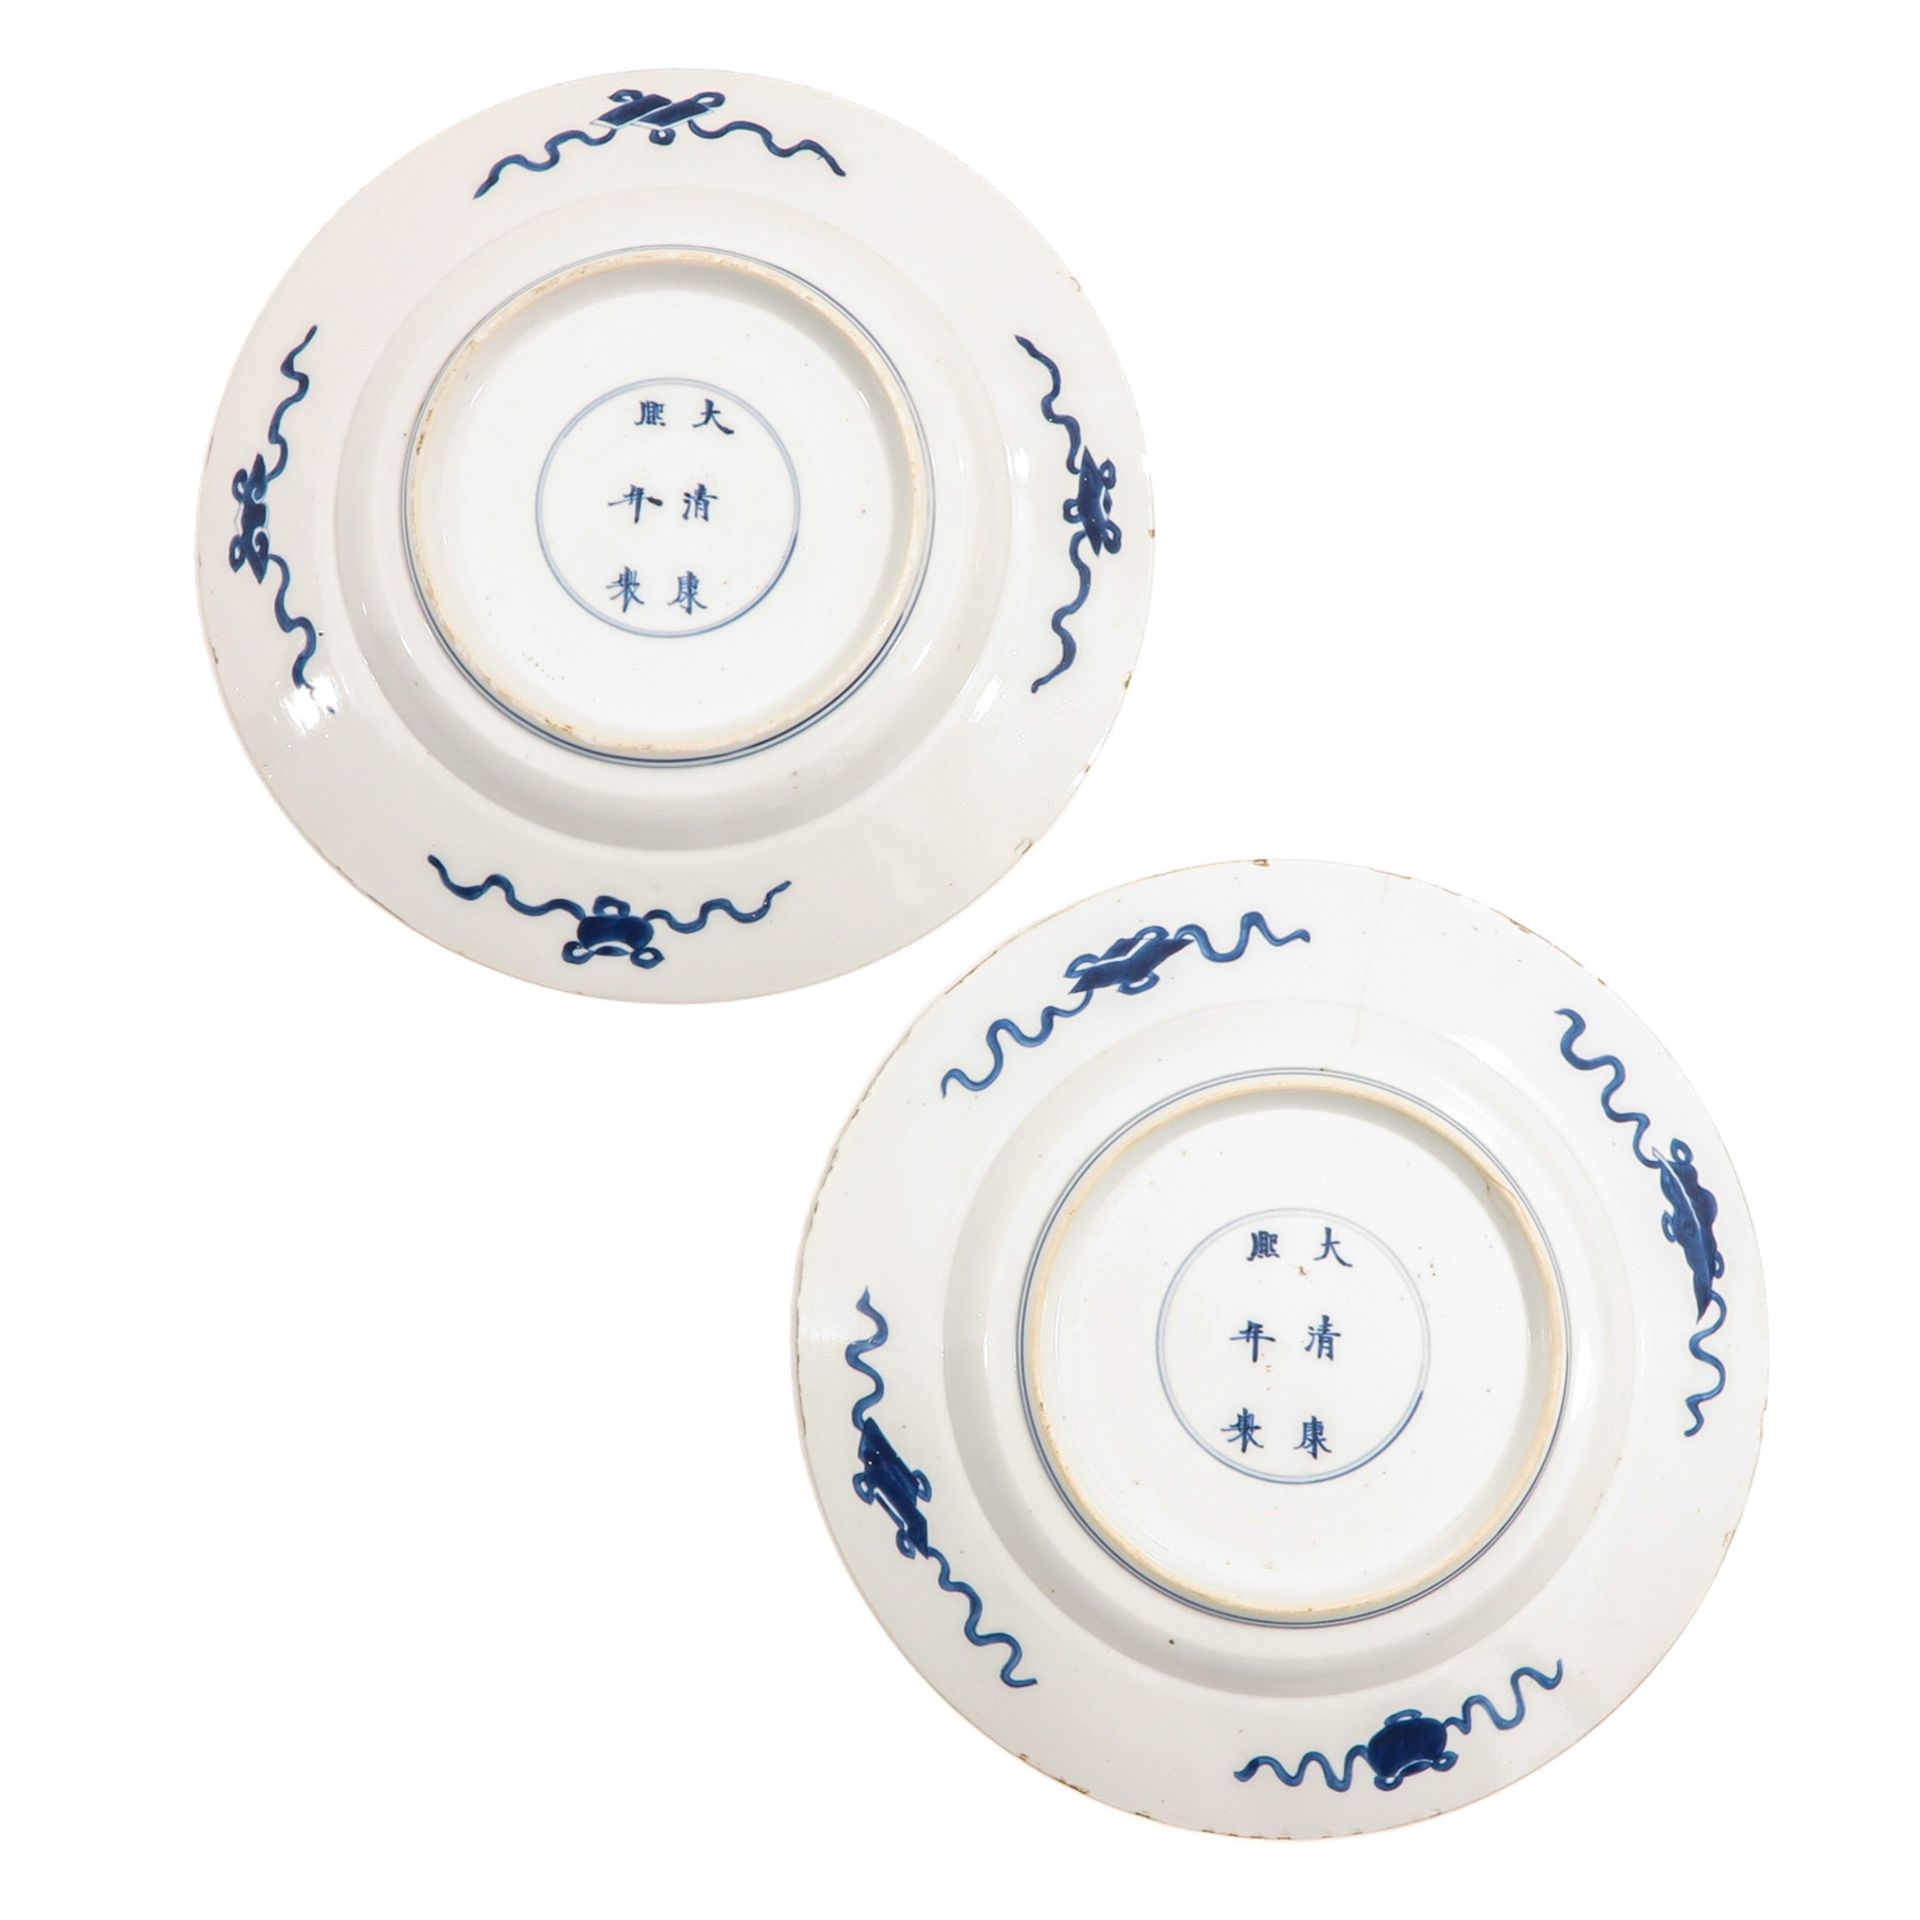 A Series of 5 Blue and White Plates - Image 6 of 10